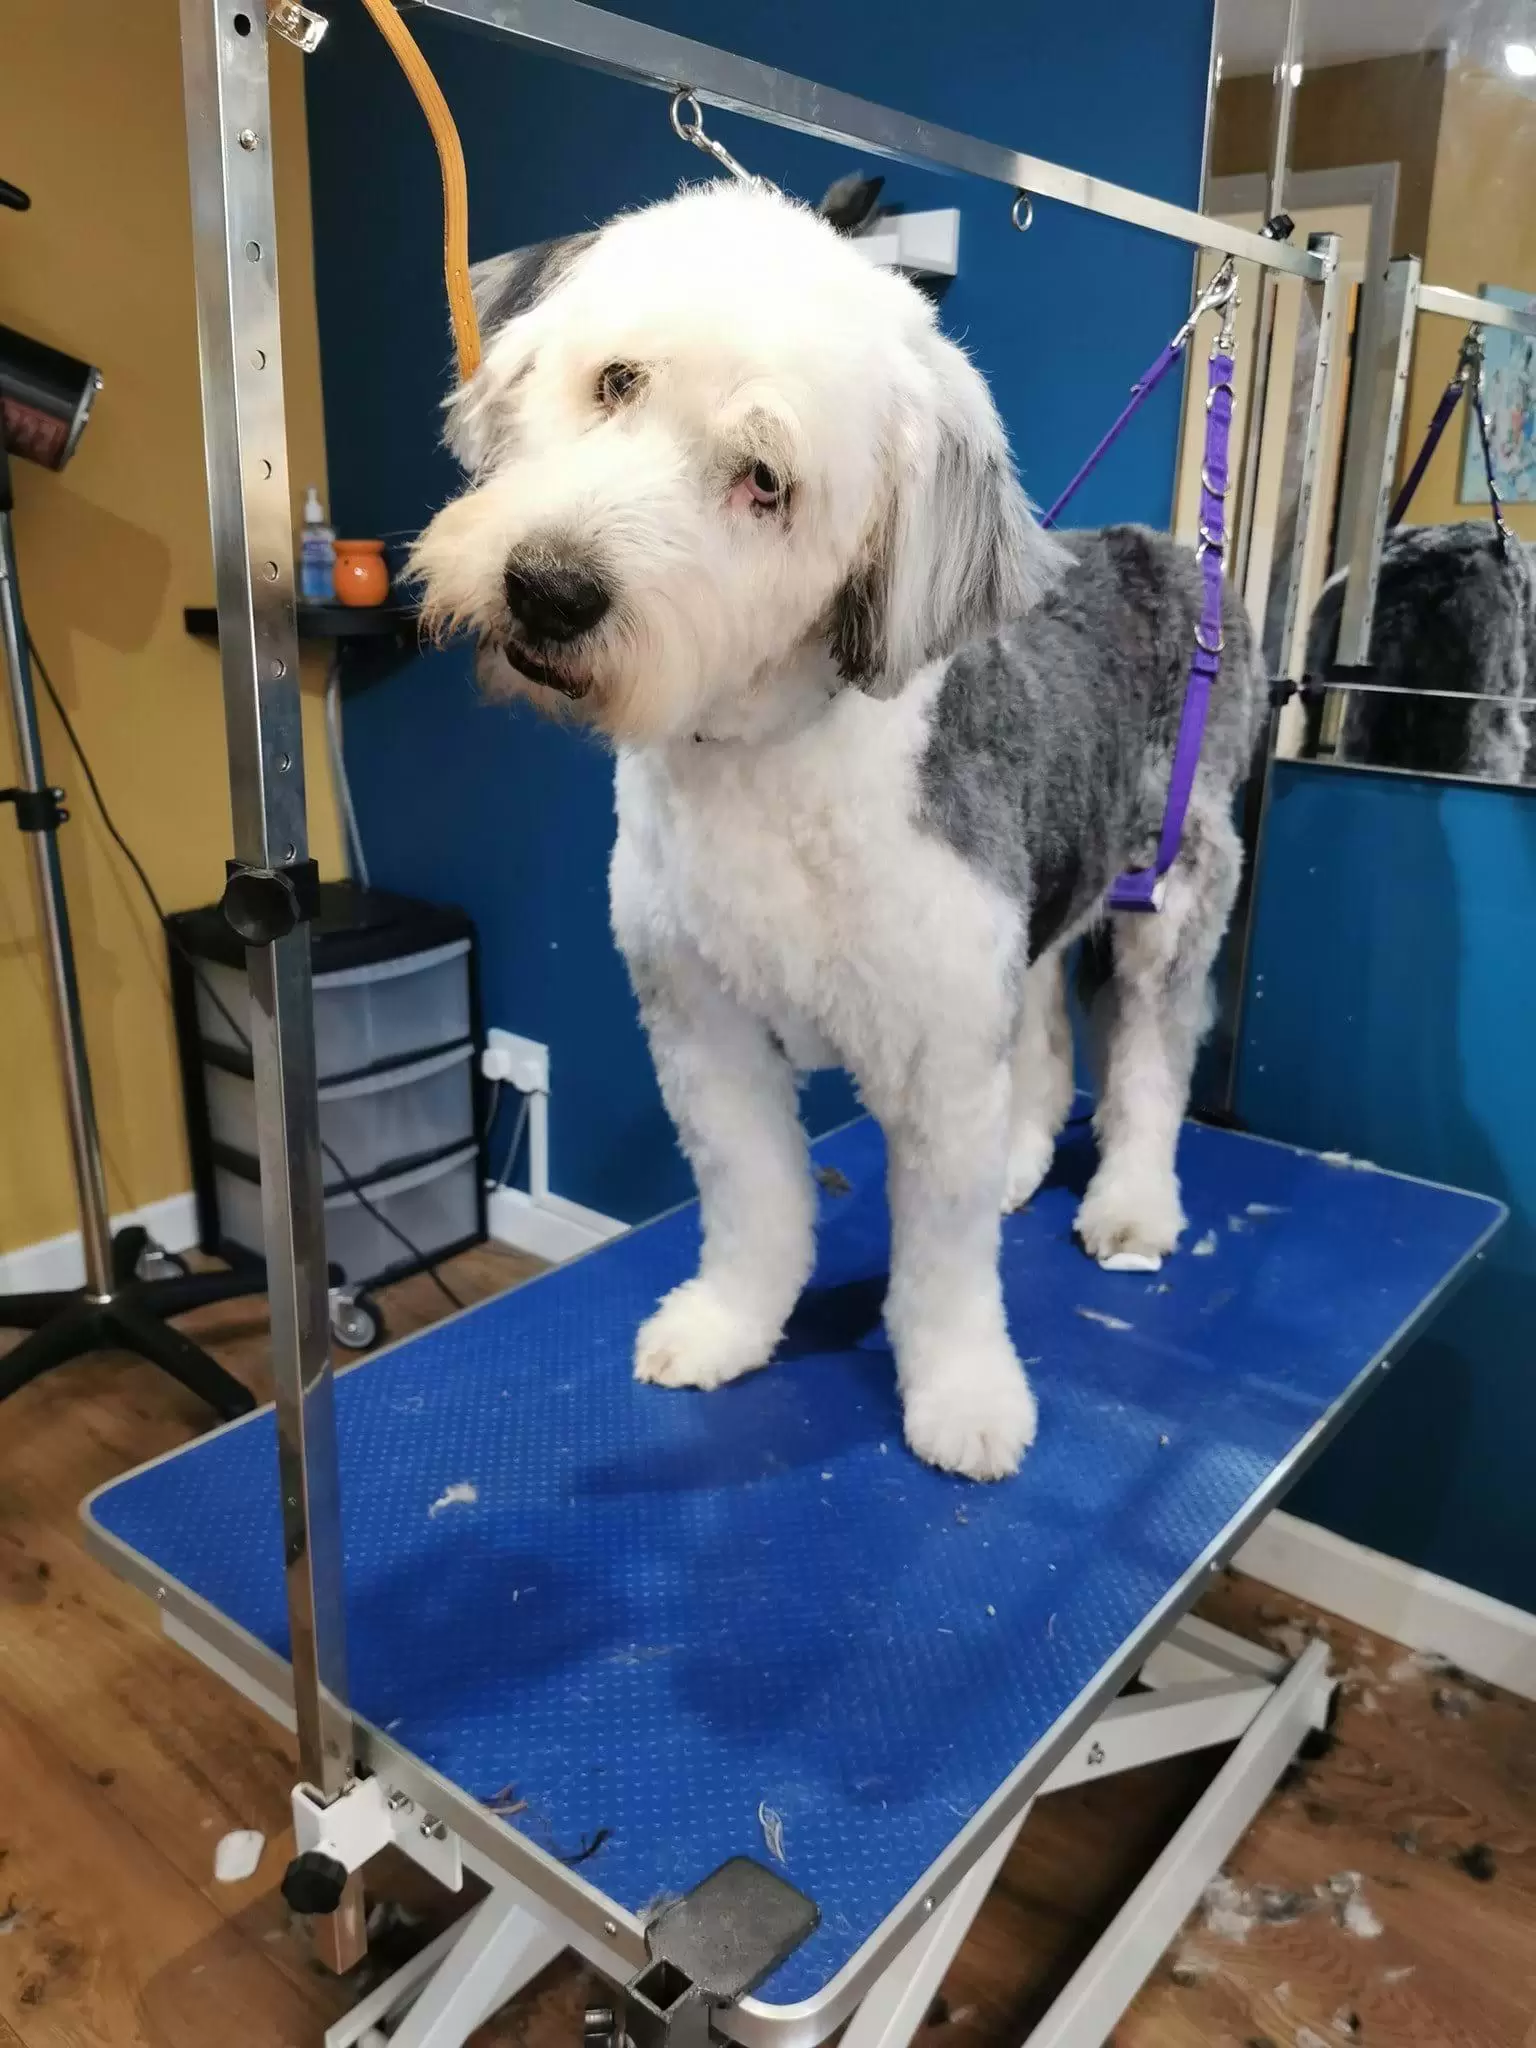 Large White and Grey Dog standing on the grooming table, with head tilted t the side